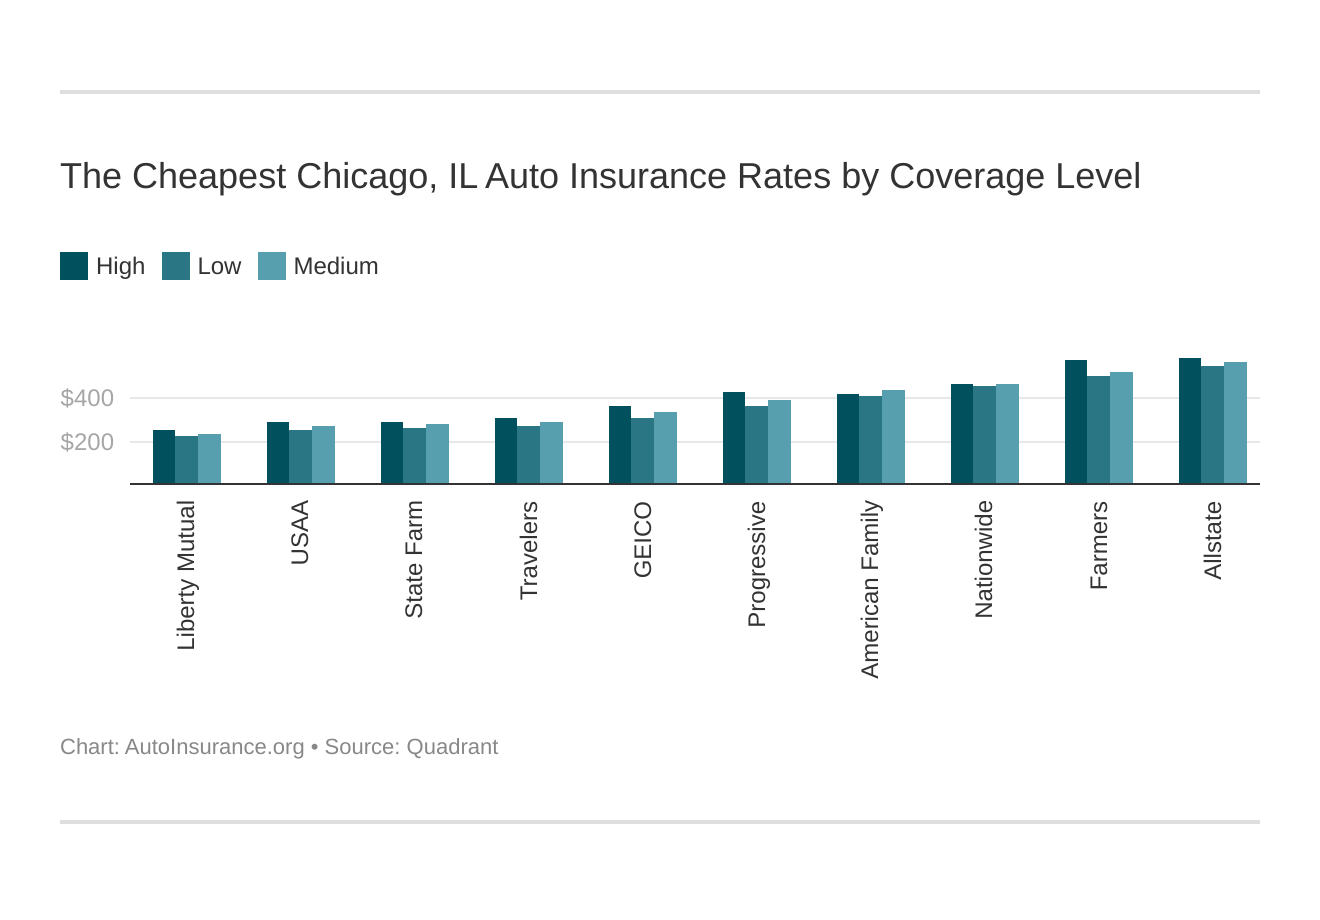 The Cheapest Chicago, IL Auto Insurance Rates by Coverage Level